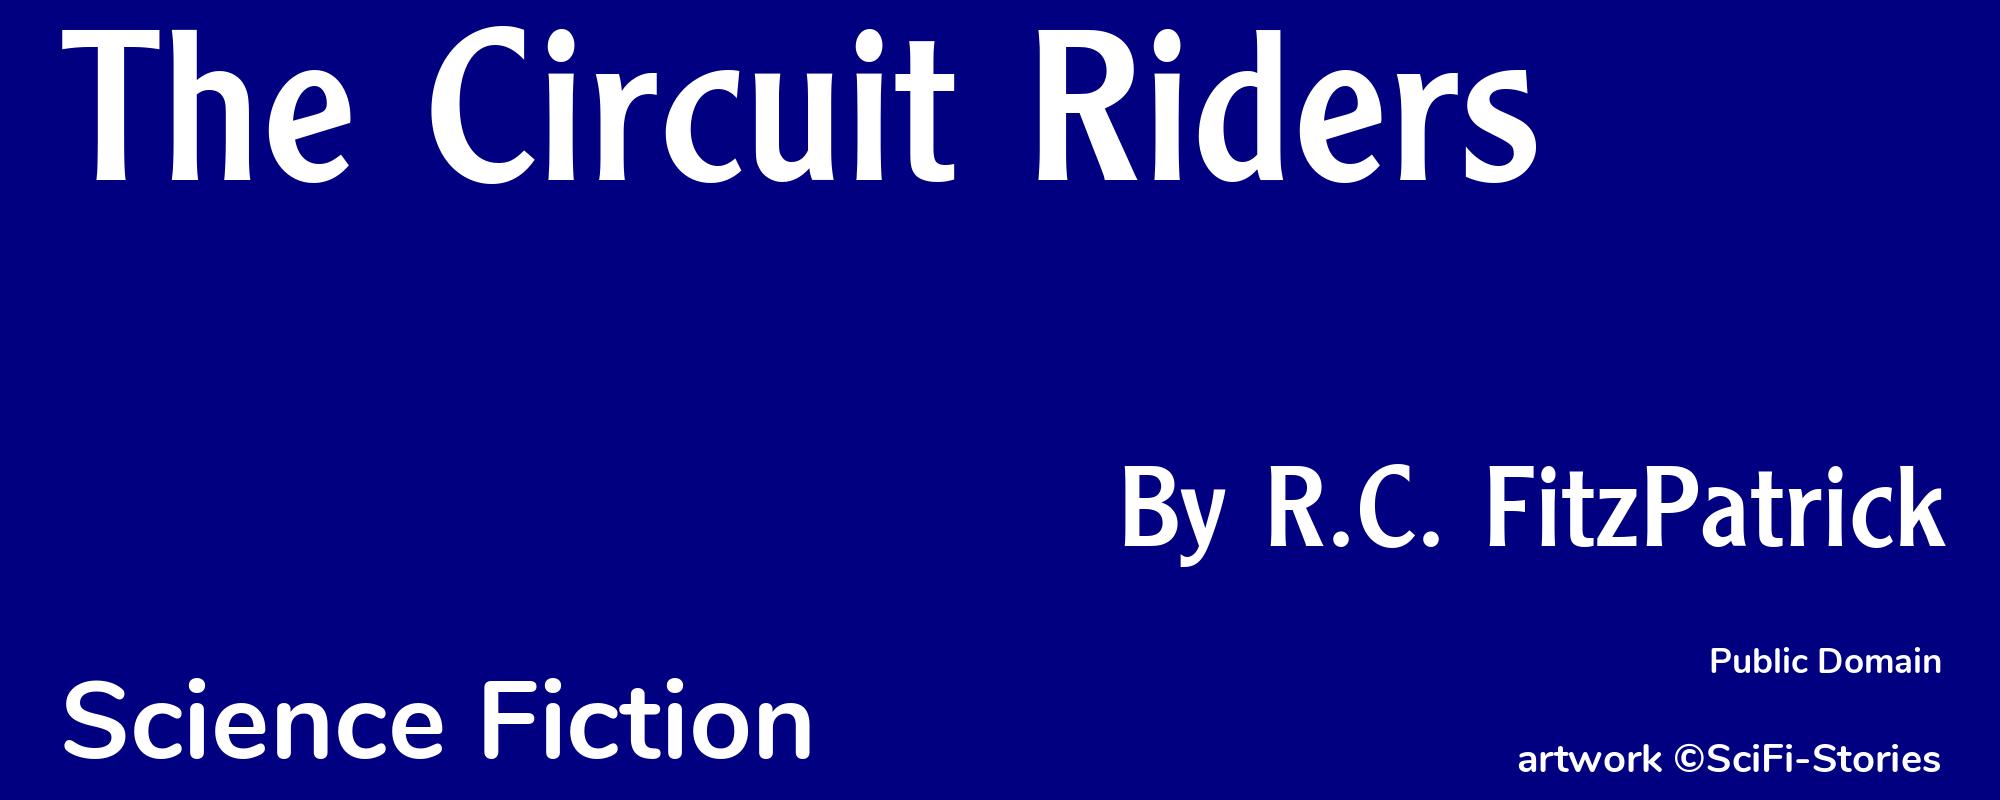 The Circuit Riders - Cover